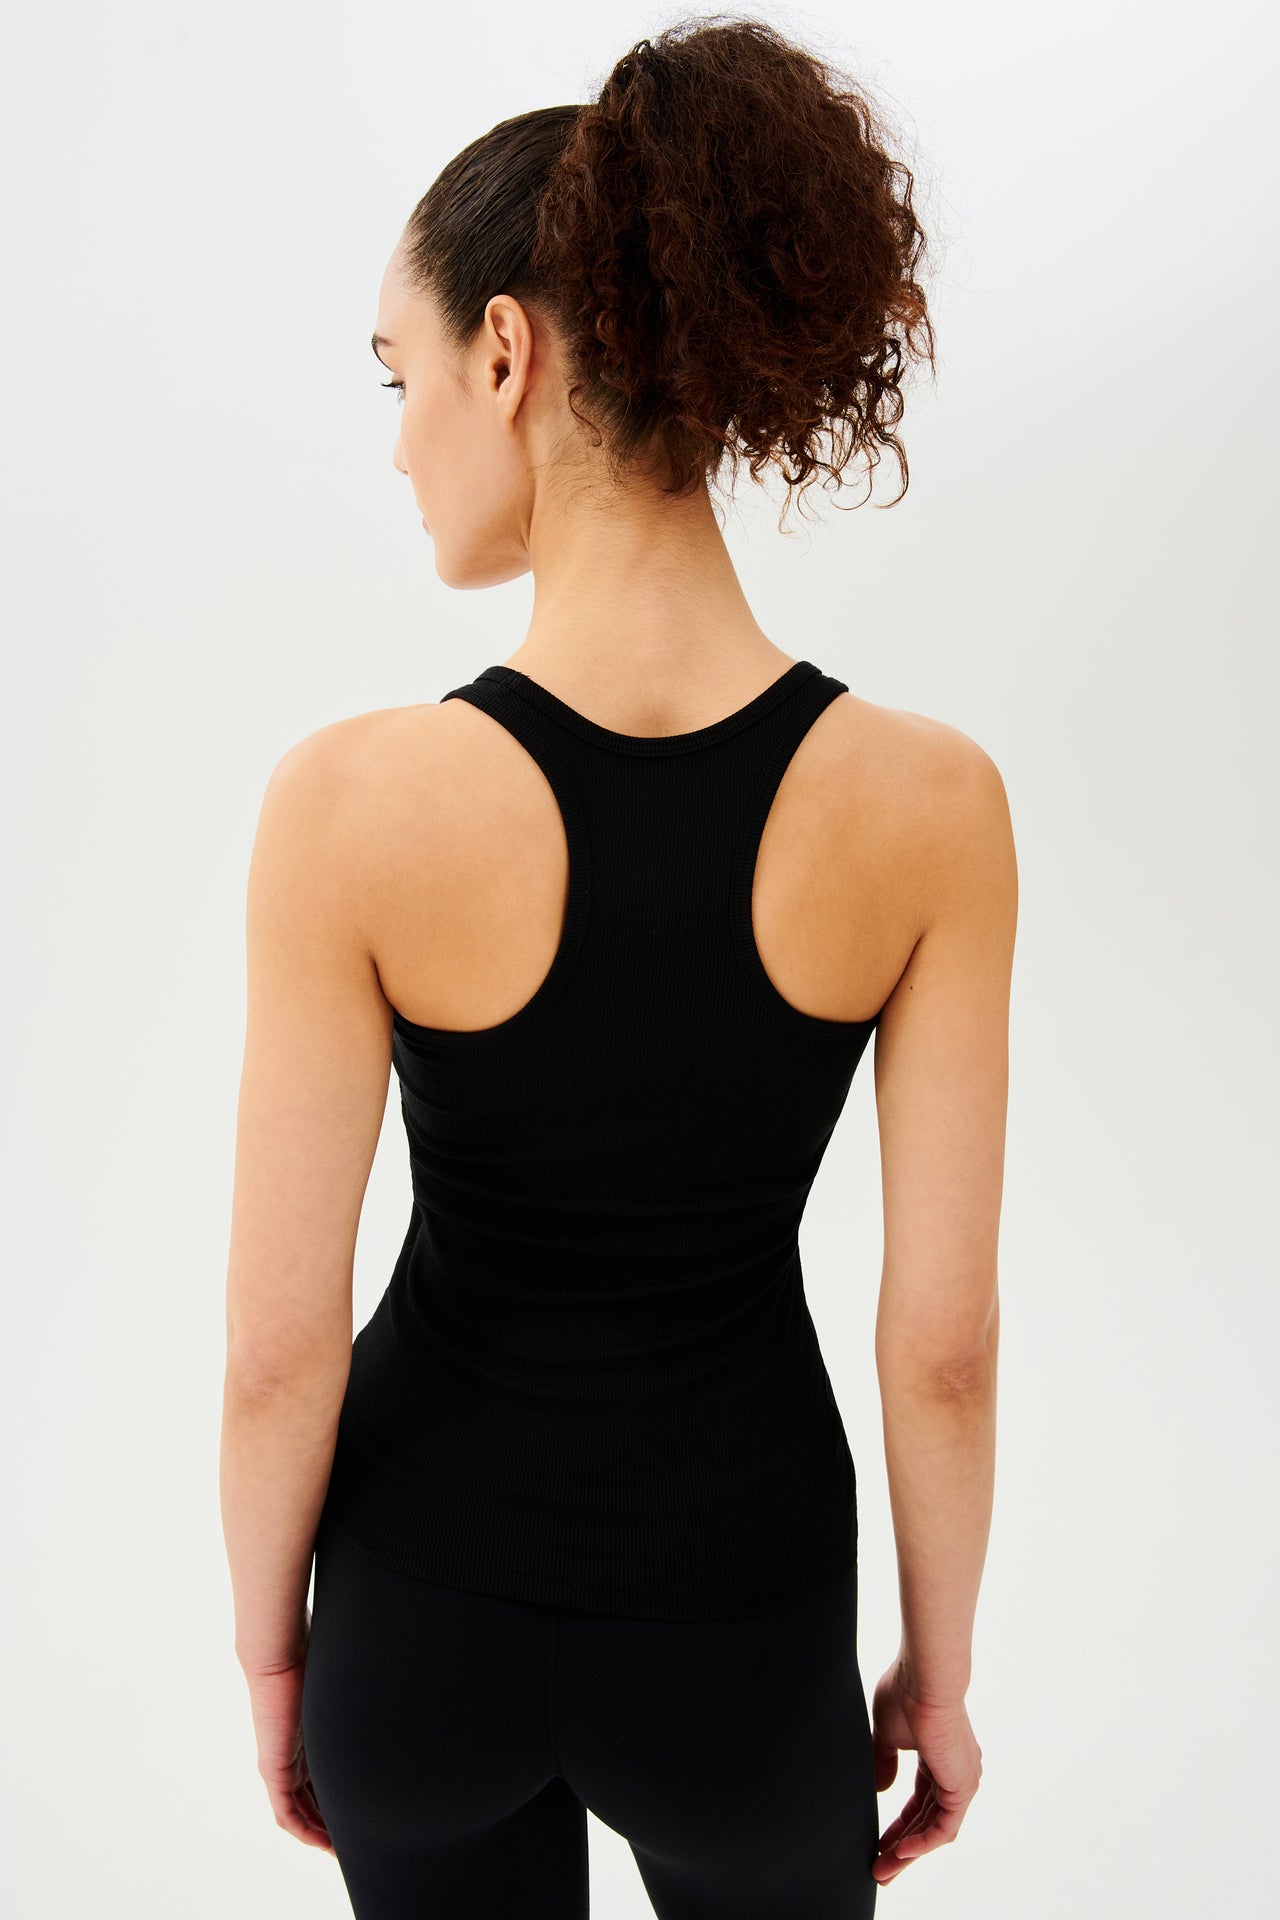 Back view of girl wearing a black tank top and black leggings